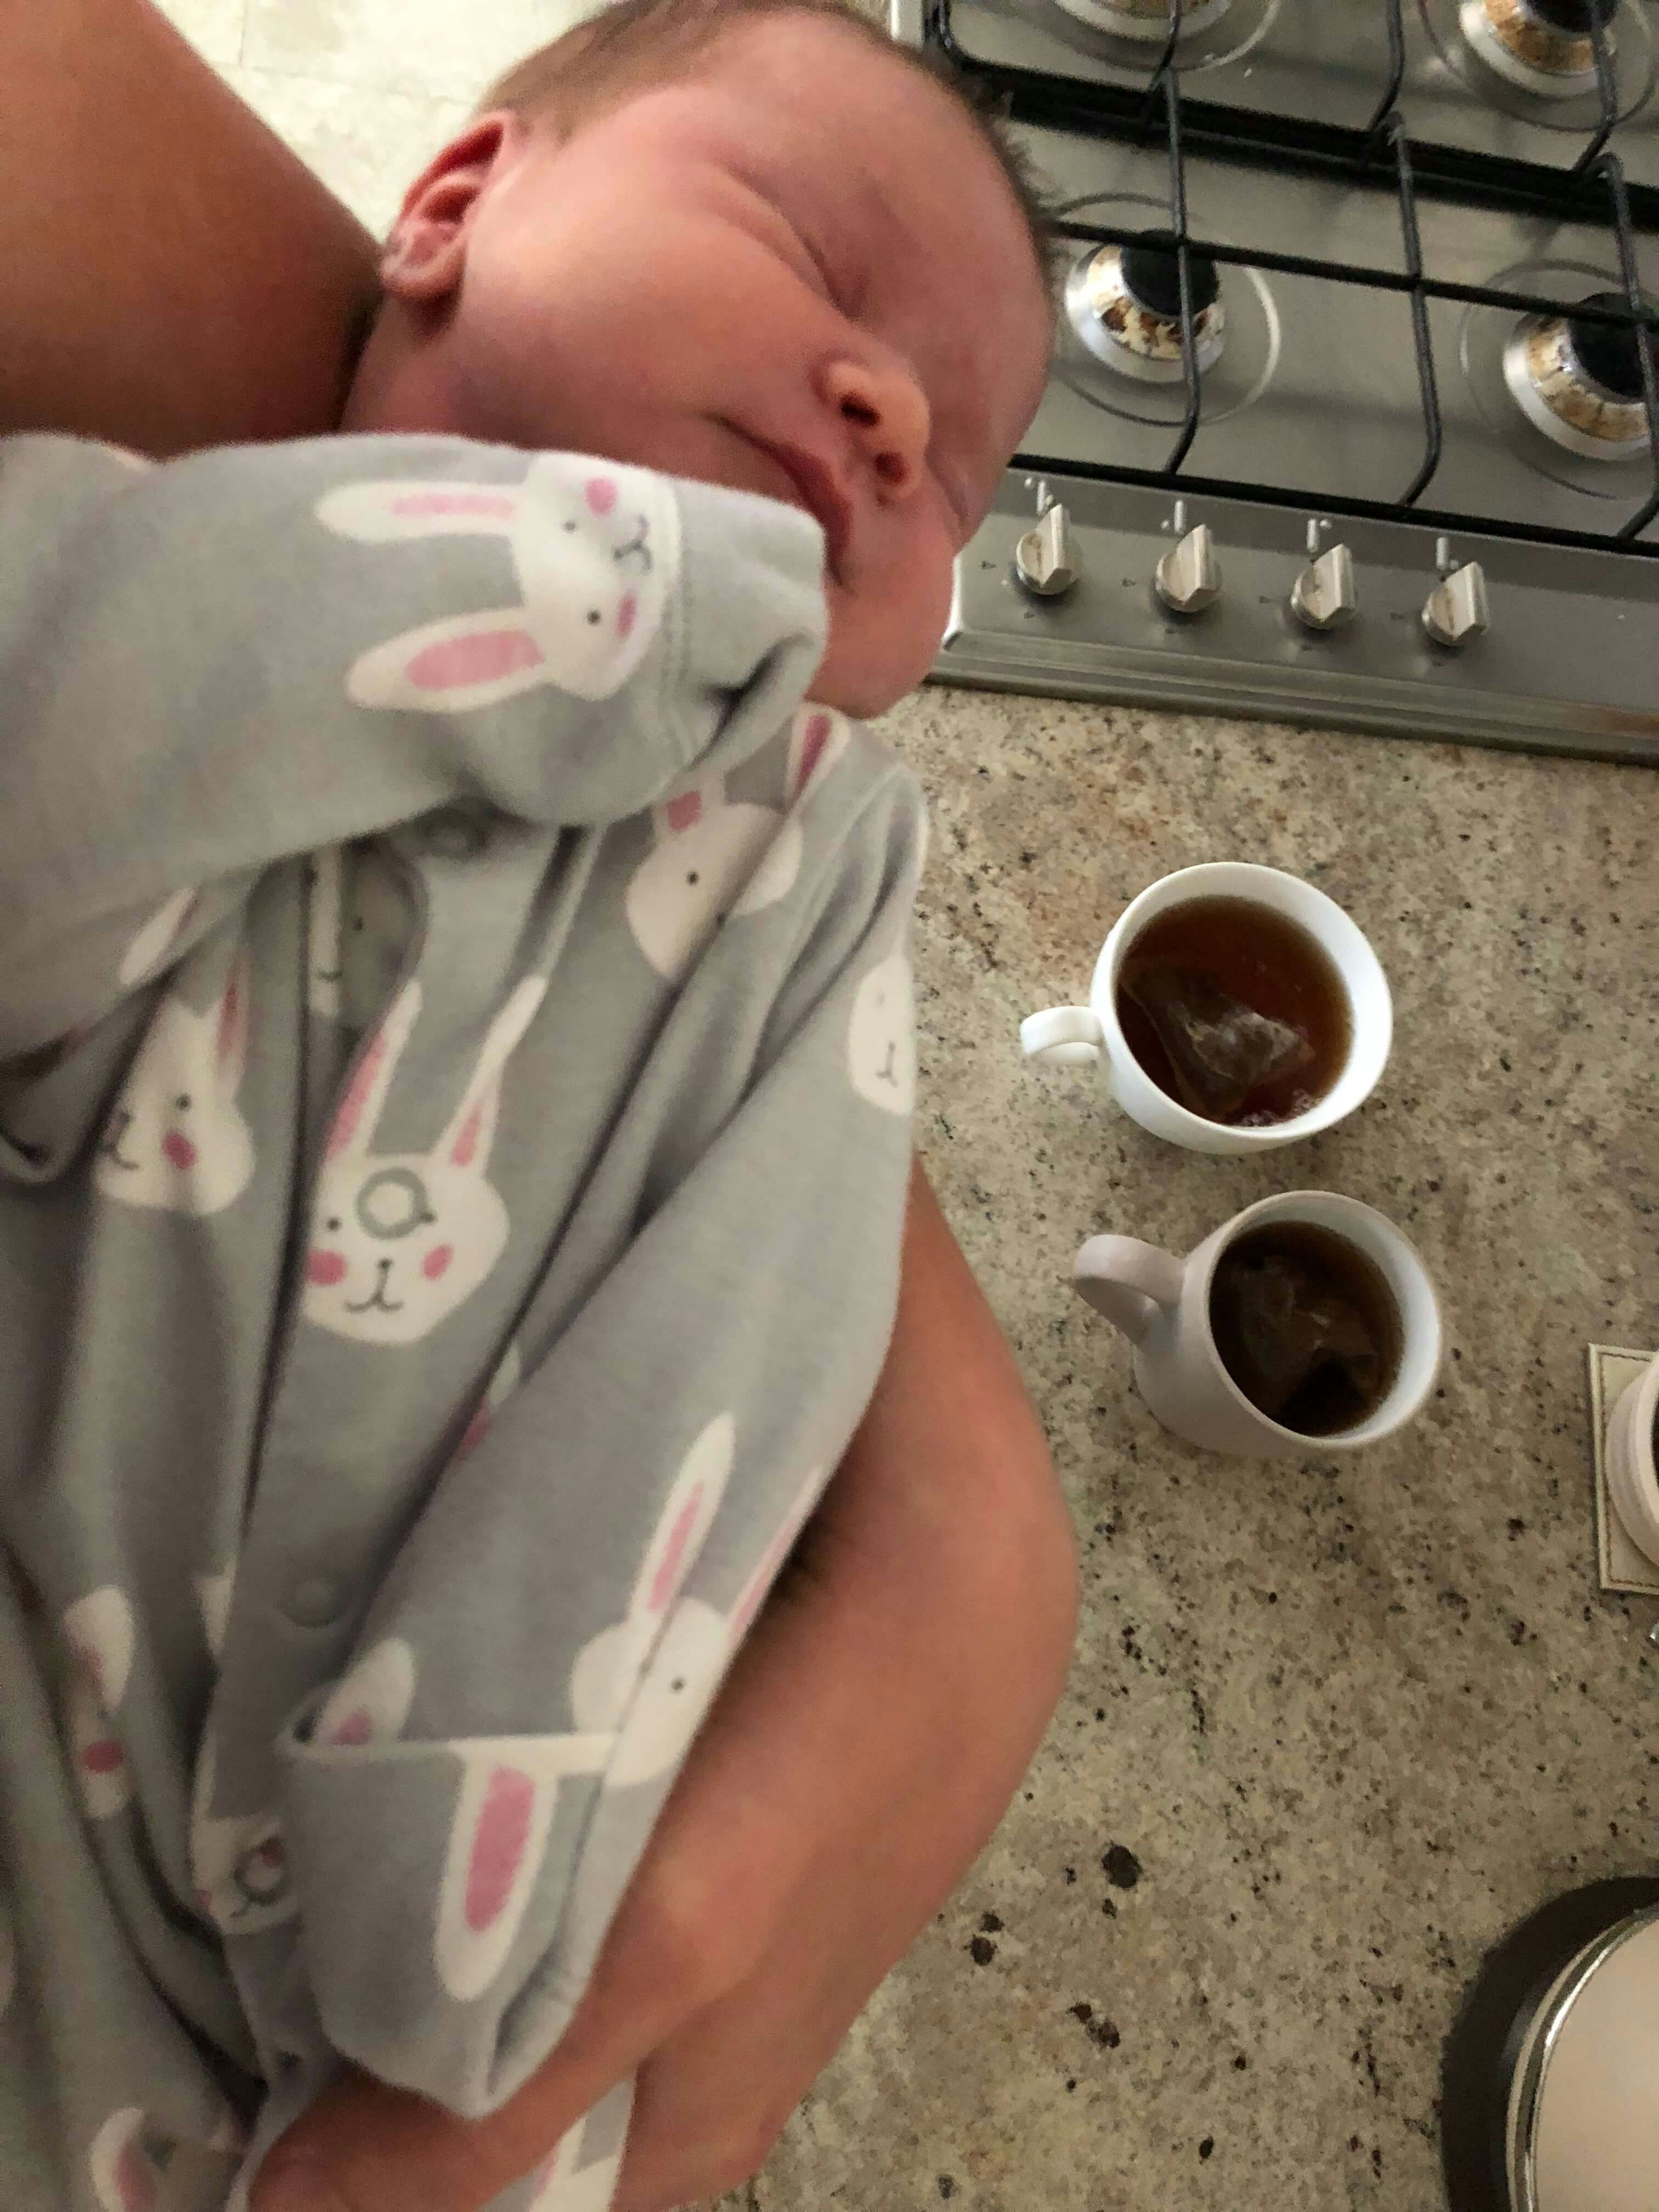 A baby is cradled while two cups of tea are brewed in the background